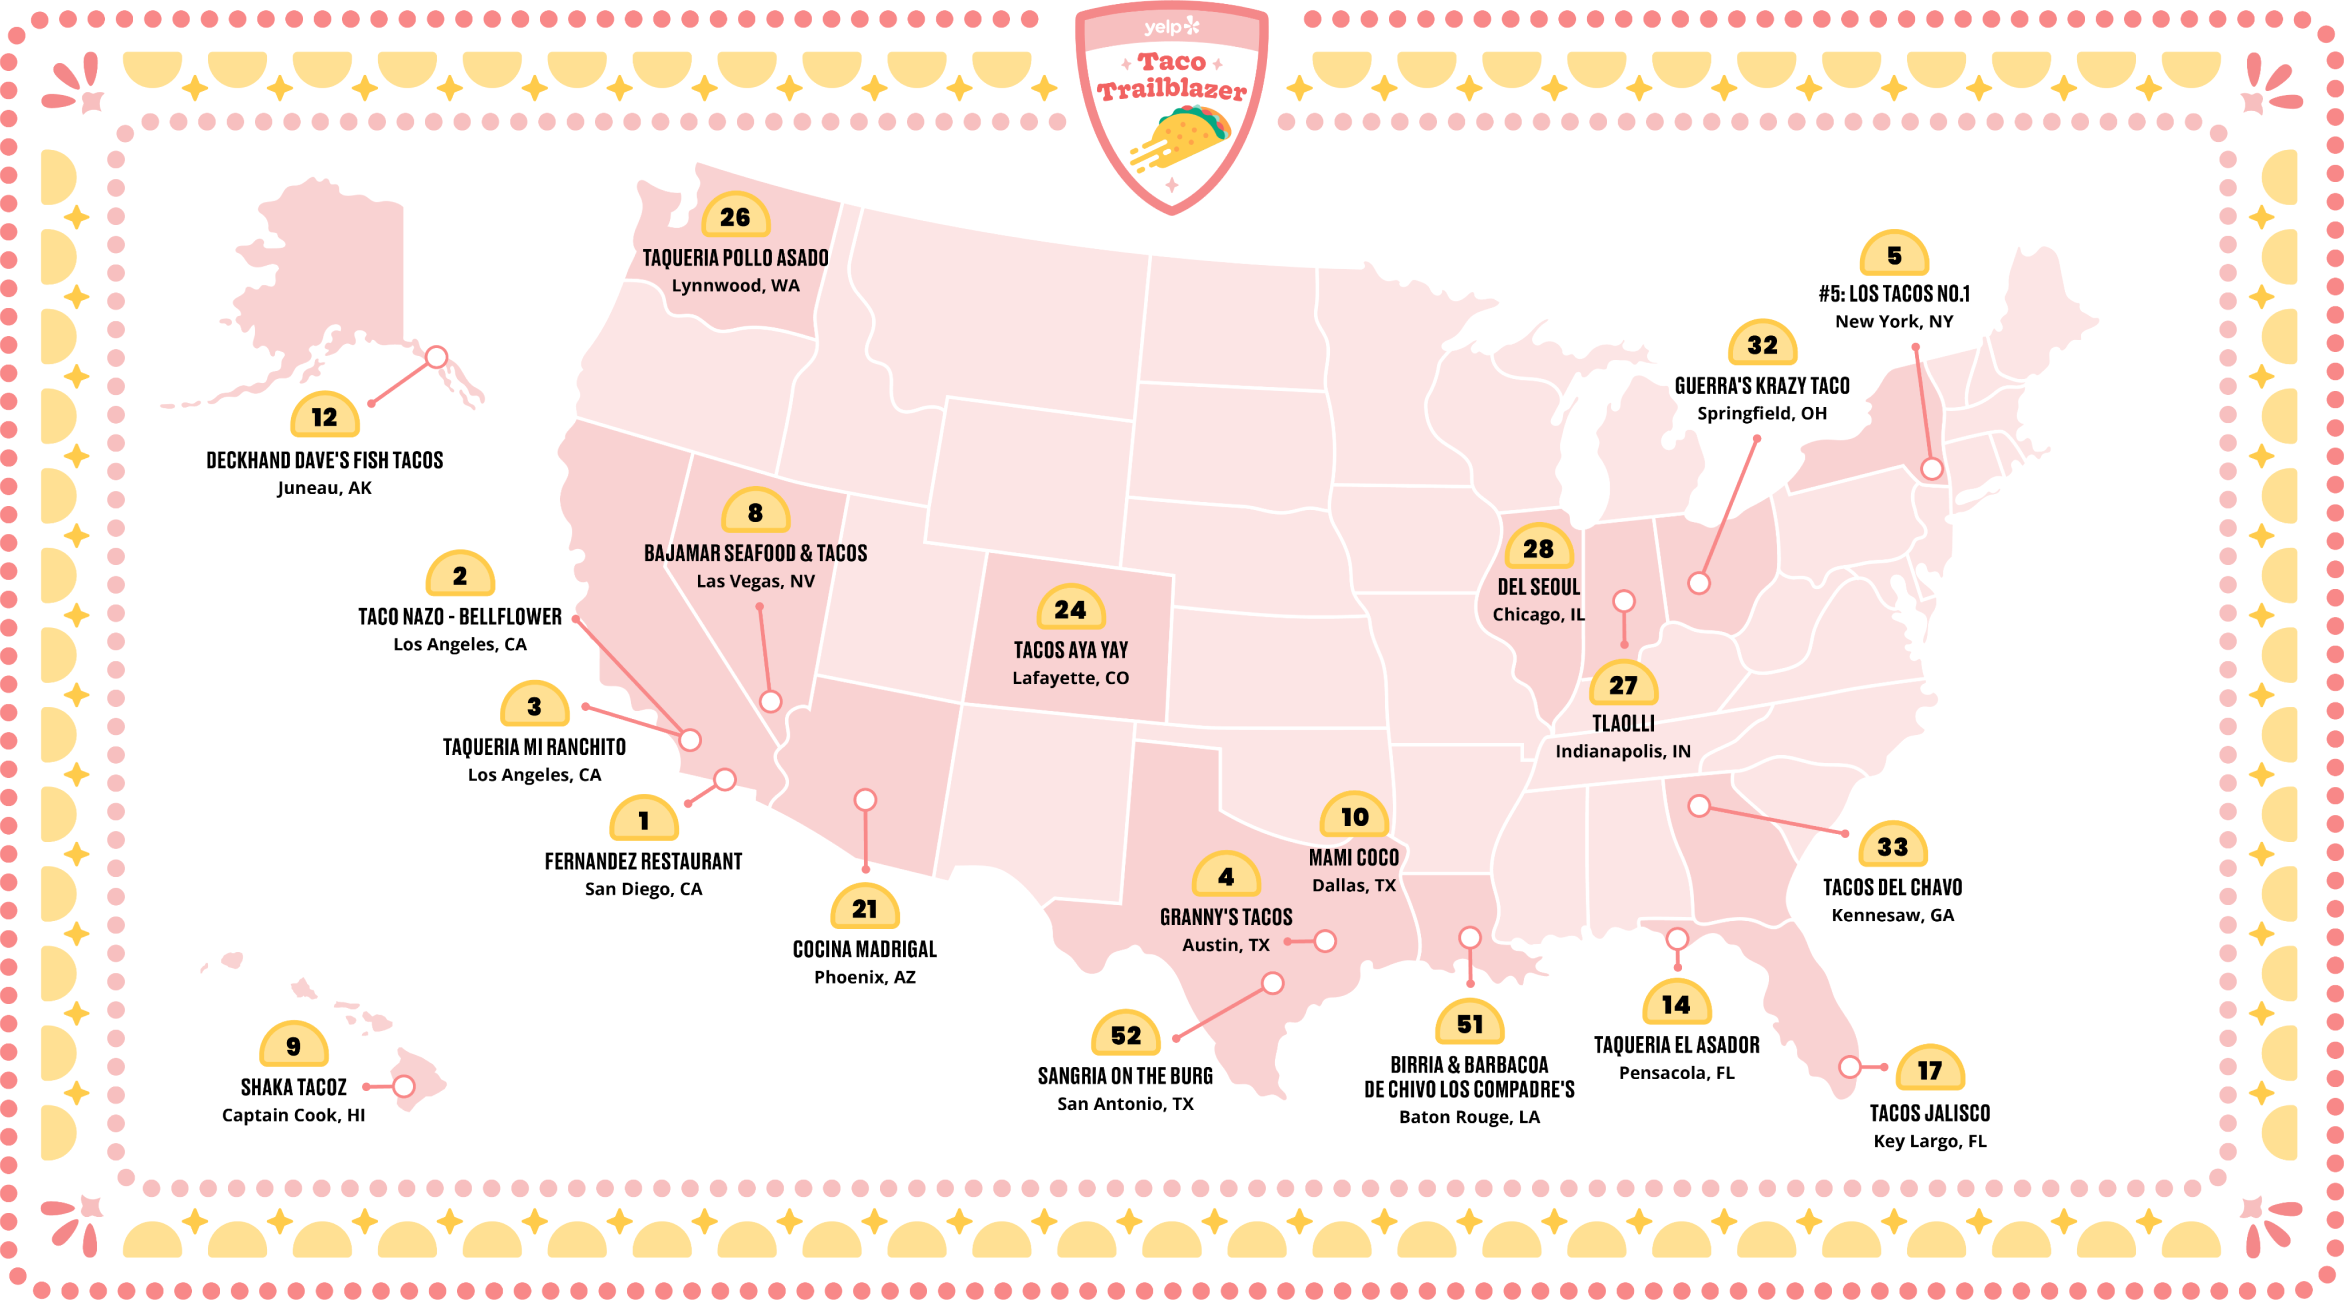 A map of Yel'ps Taco Trail of the Top 100 Taco Spots across the country